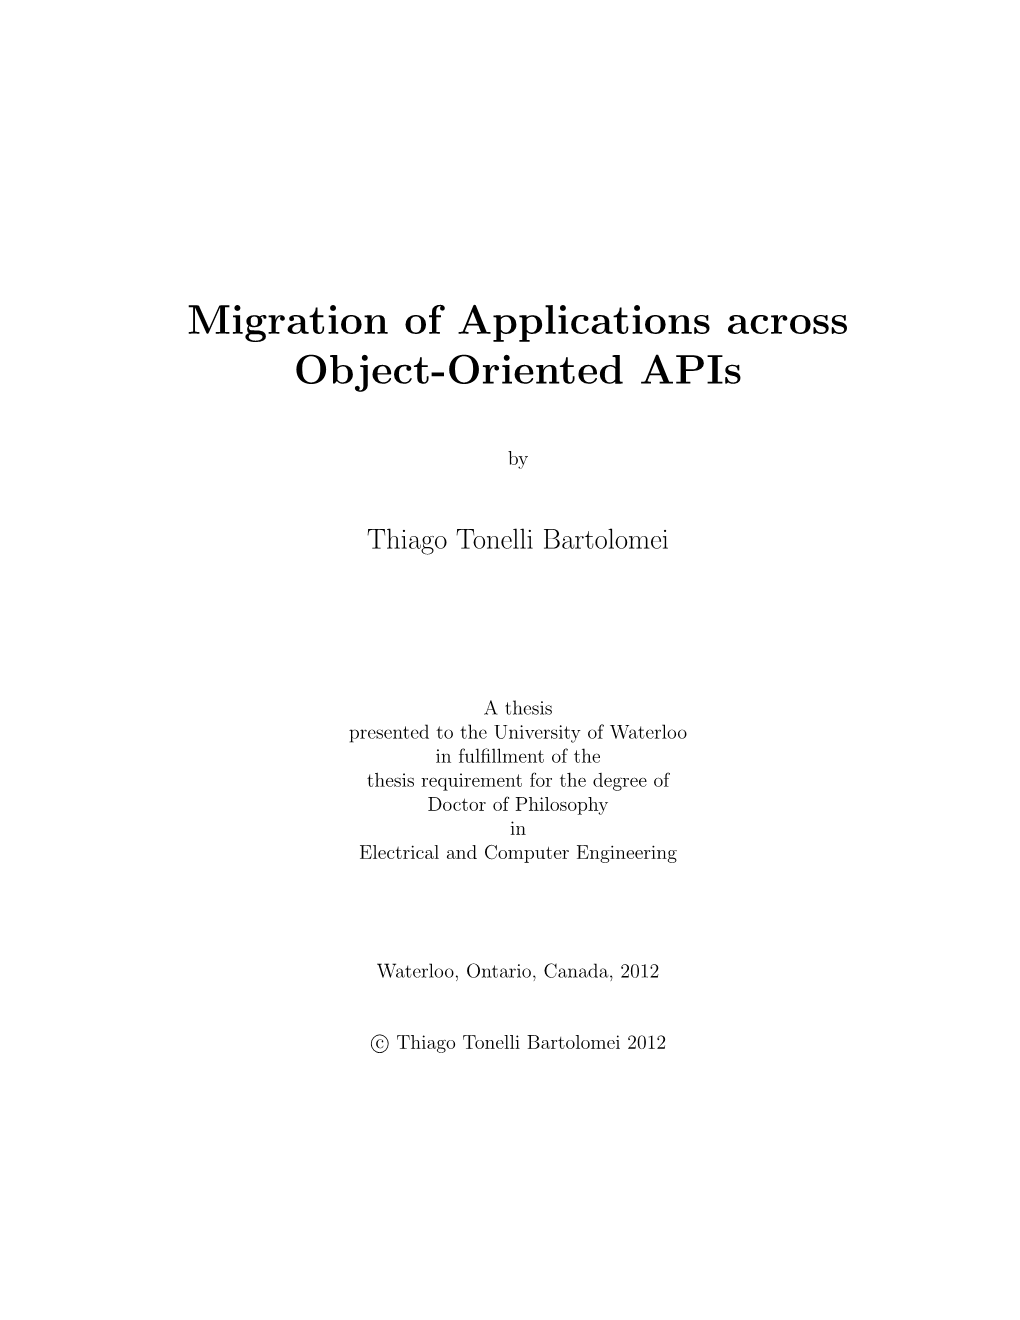 Migration of Applications Across Object-Oriented Apis